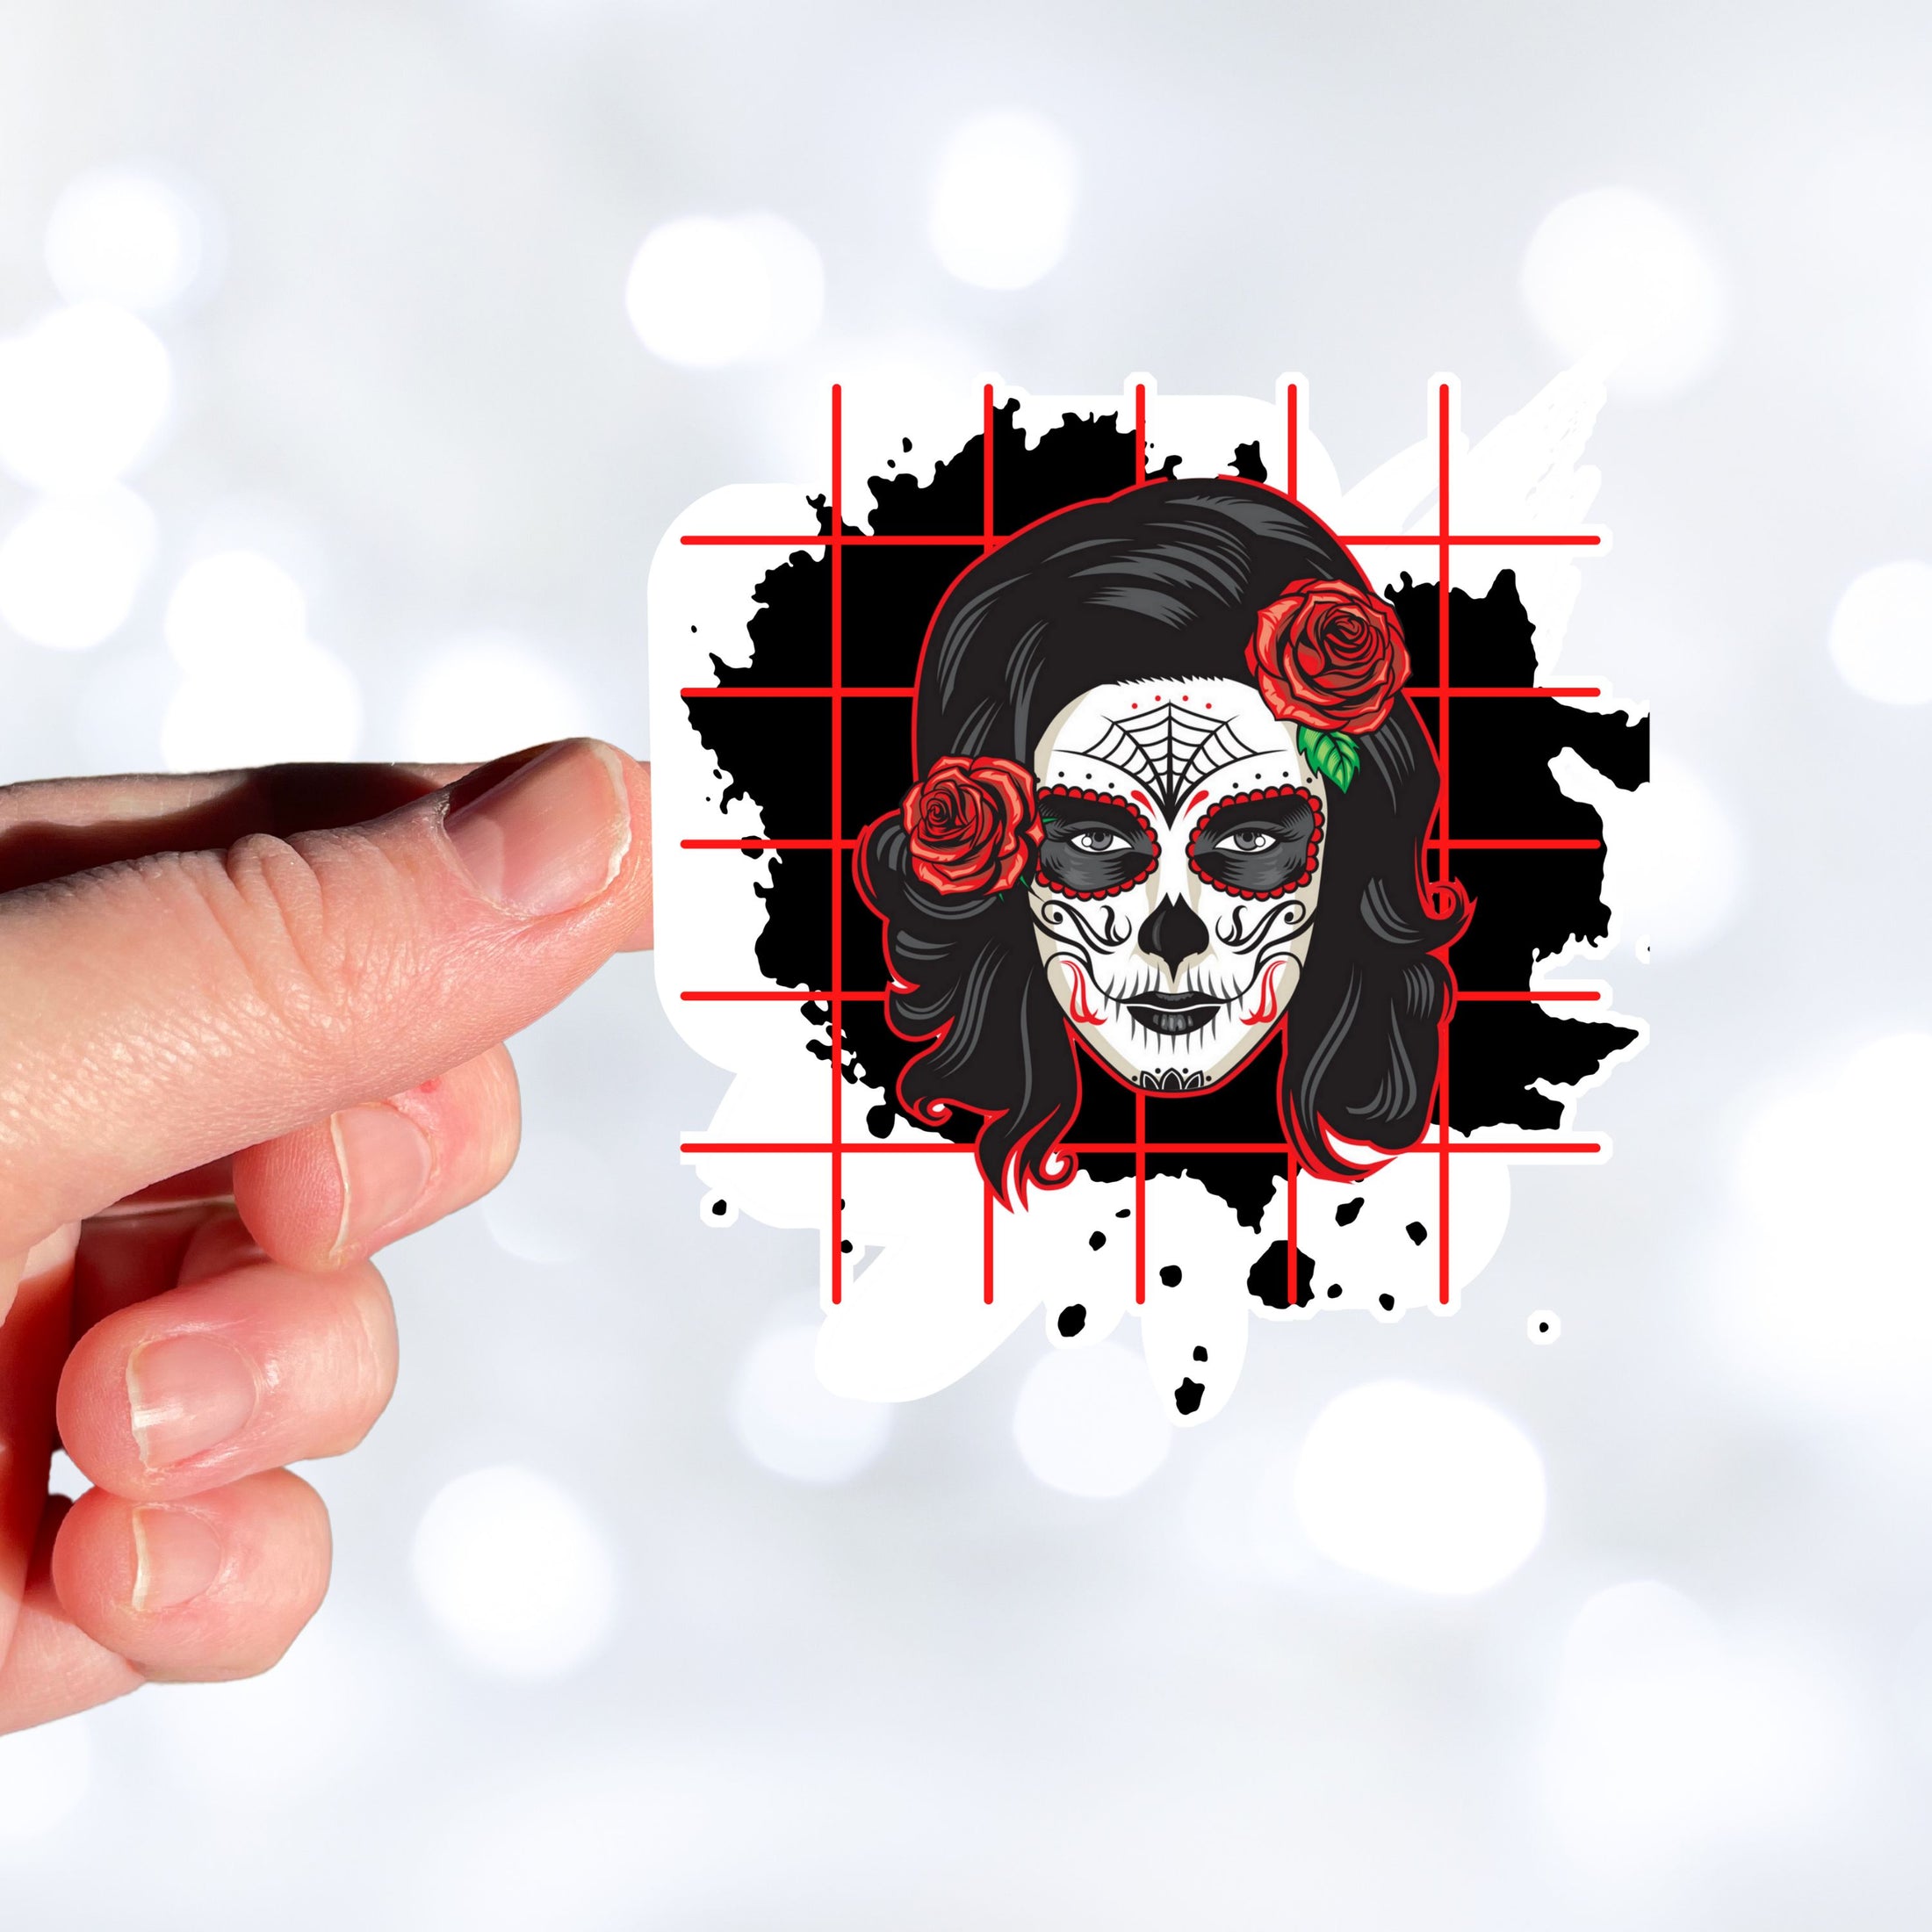 Trash Polka uses red, black, and white with a combination of abstract, surrealistic, and realistic images, and this individual die-cut sticker features a sugar skull woman with roses in her hair on a black background with a red grid. This image shows a hand holding the trash polka sugar skull sticker.